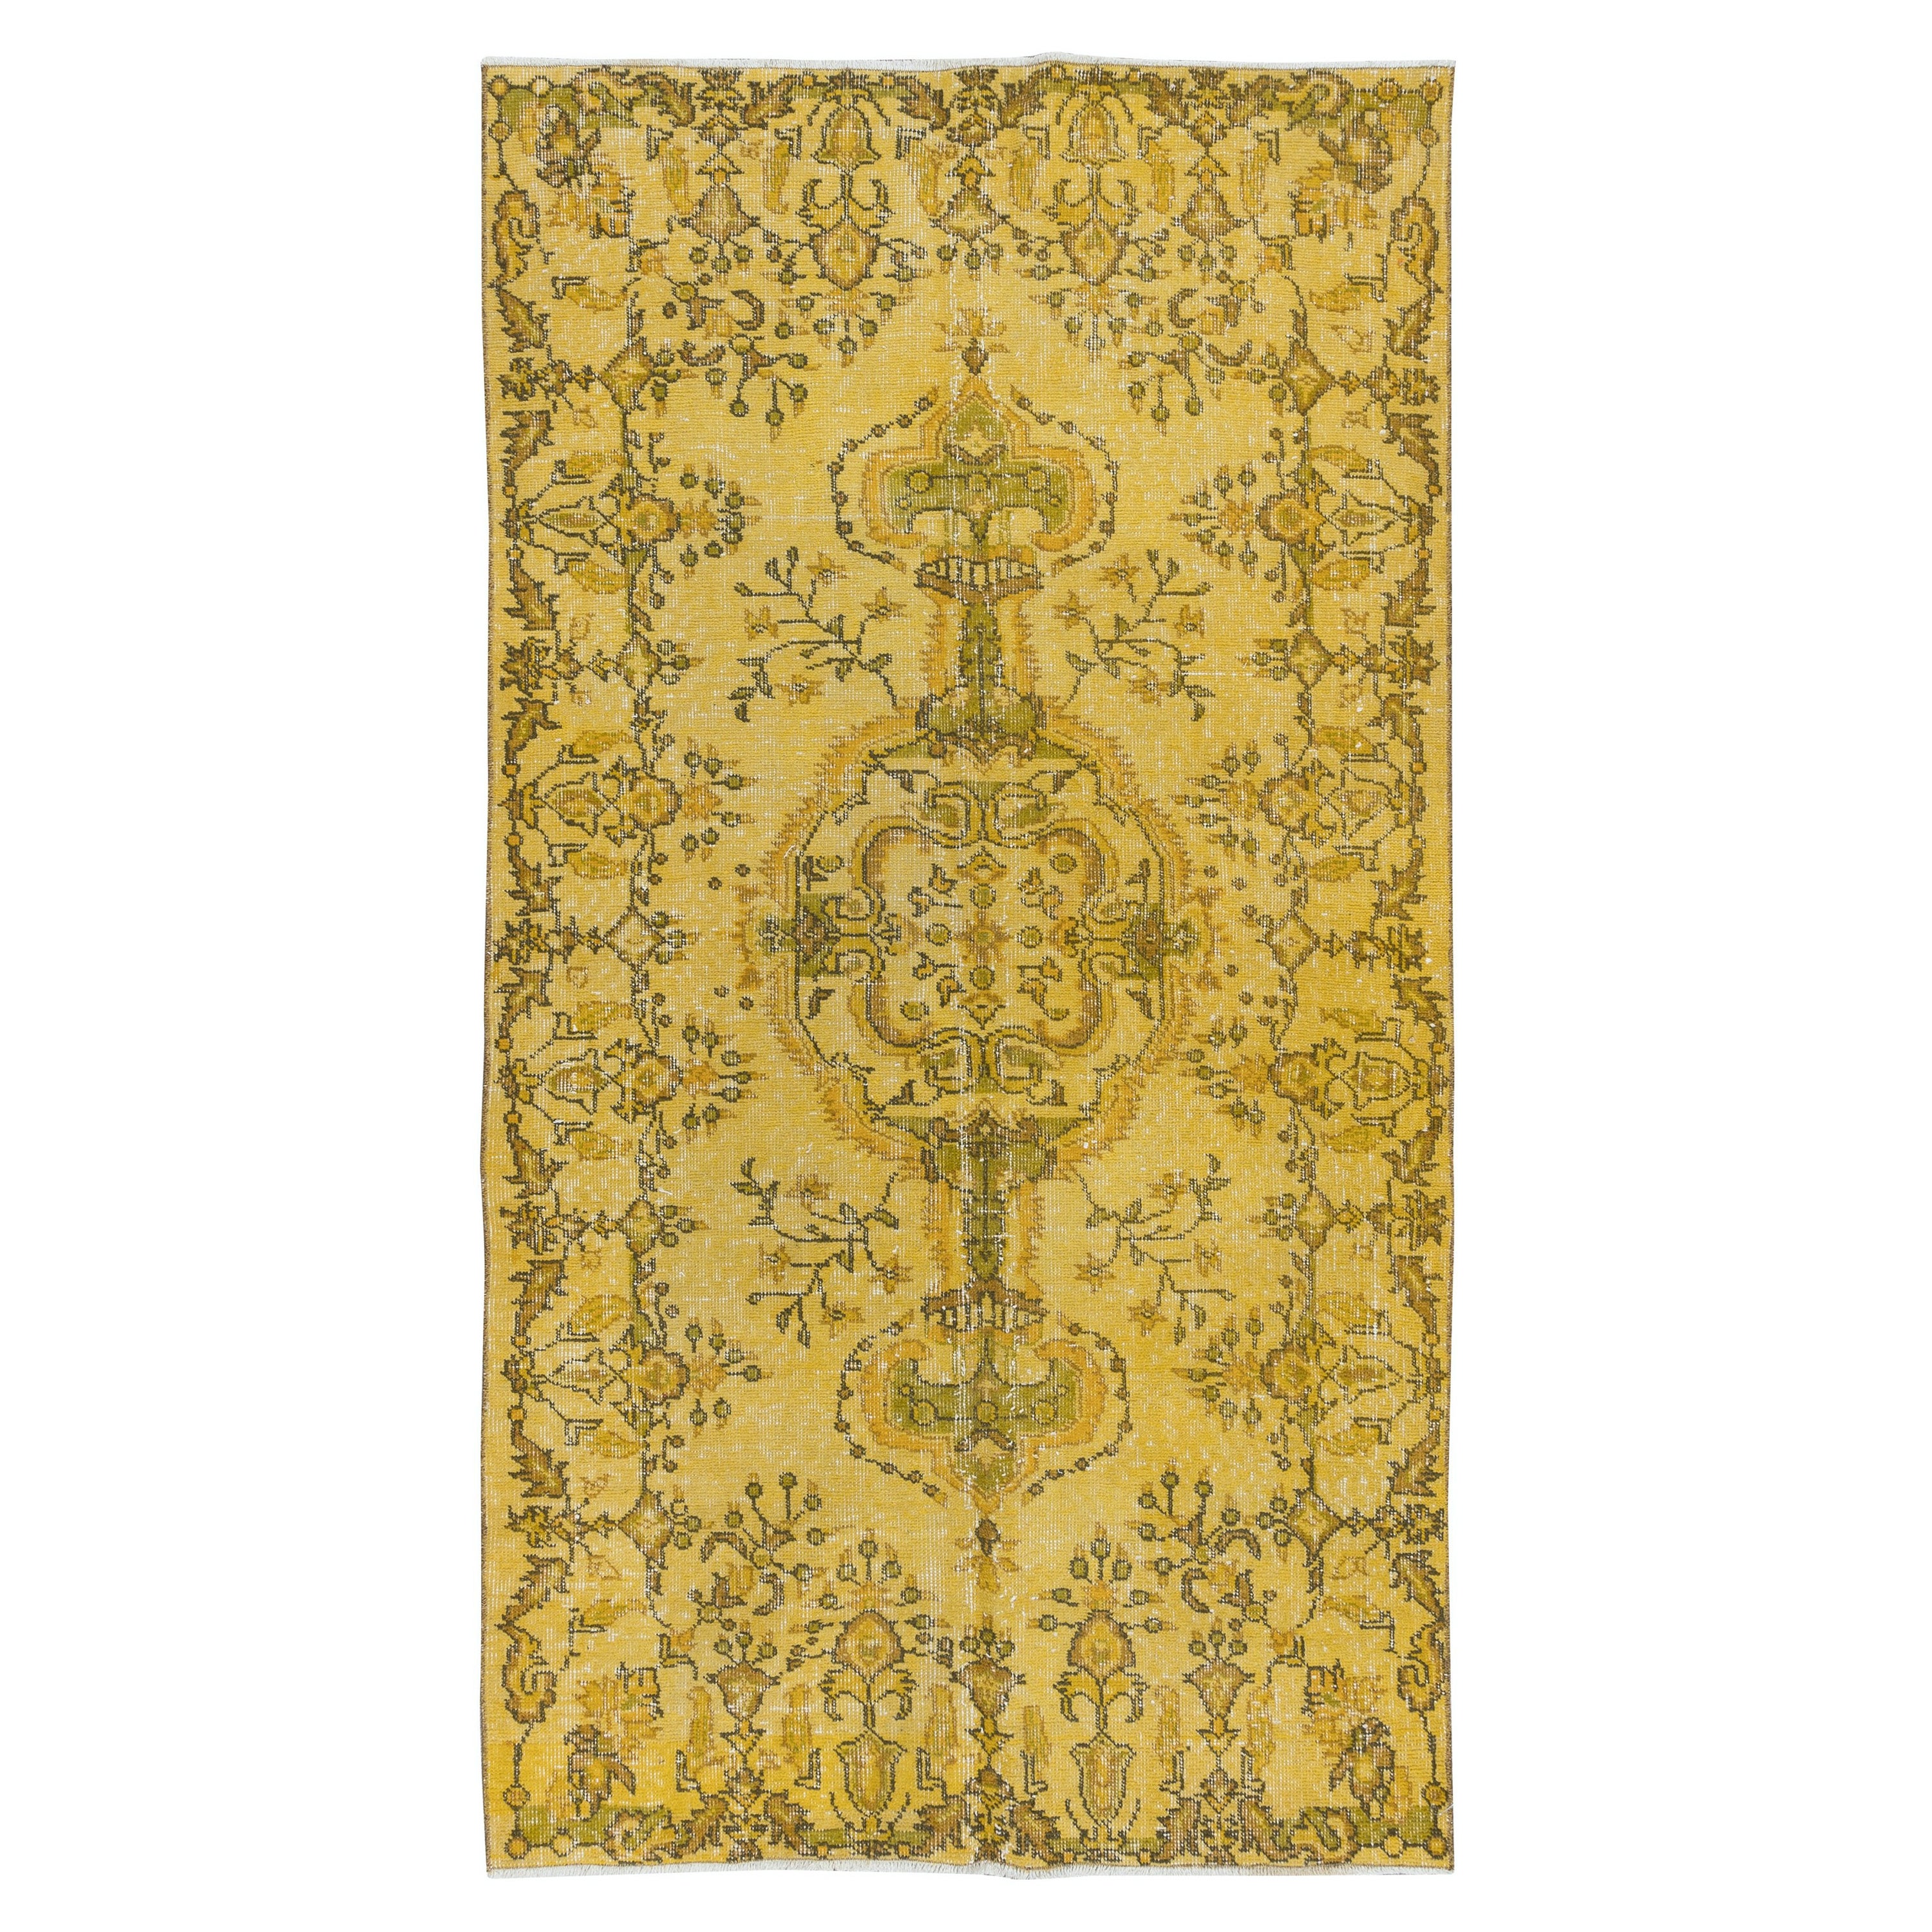 3.7x6.6 Ft Modern Handmade Turkish Accent Rug Decorative Yellow Over-Dyed Carpet For Sale